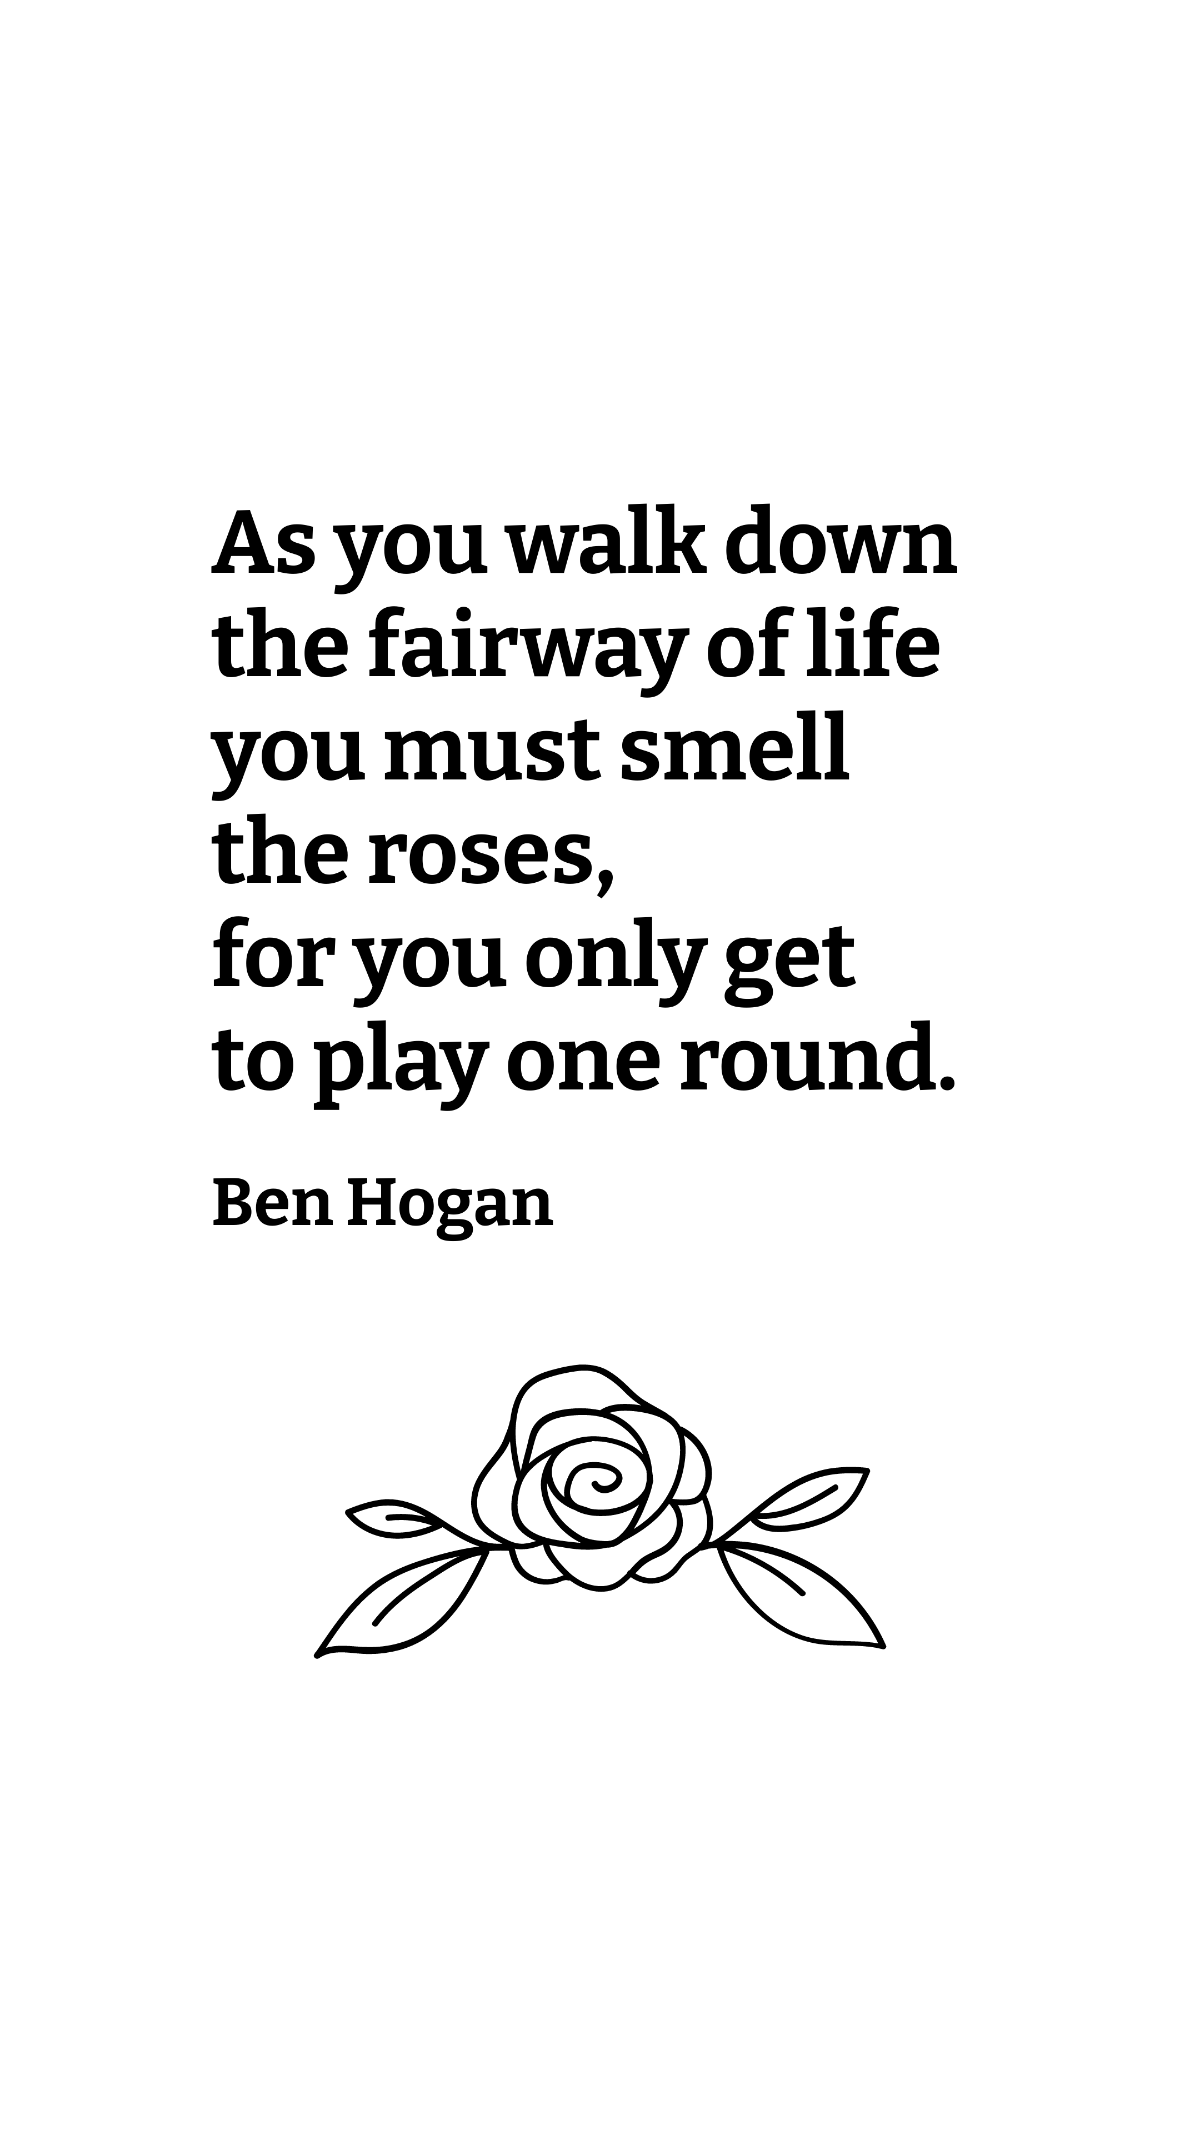 Free Ben Hogan - As you walk down the fairway of life you must smell the roses, for you only get to play one round. Template